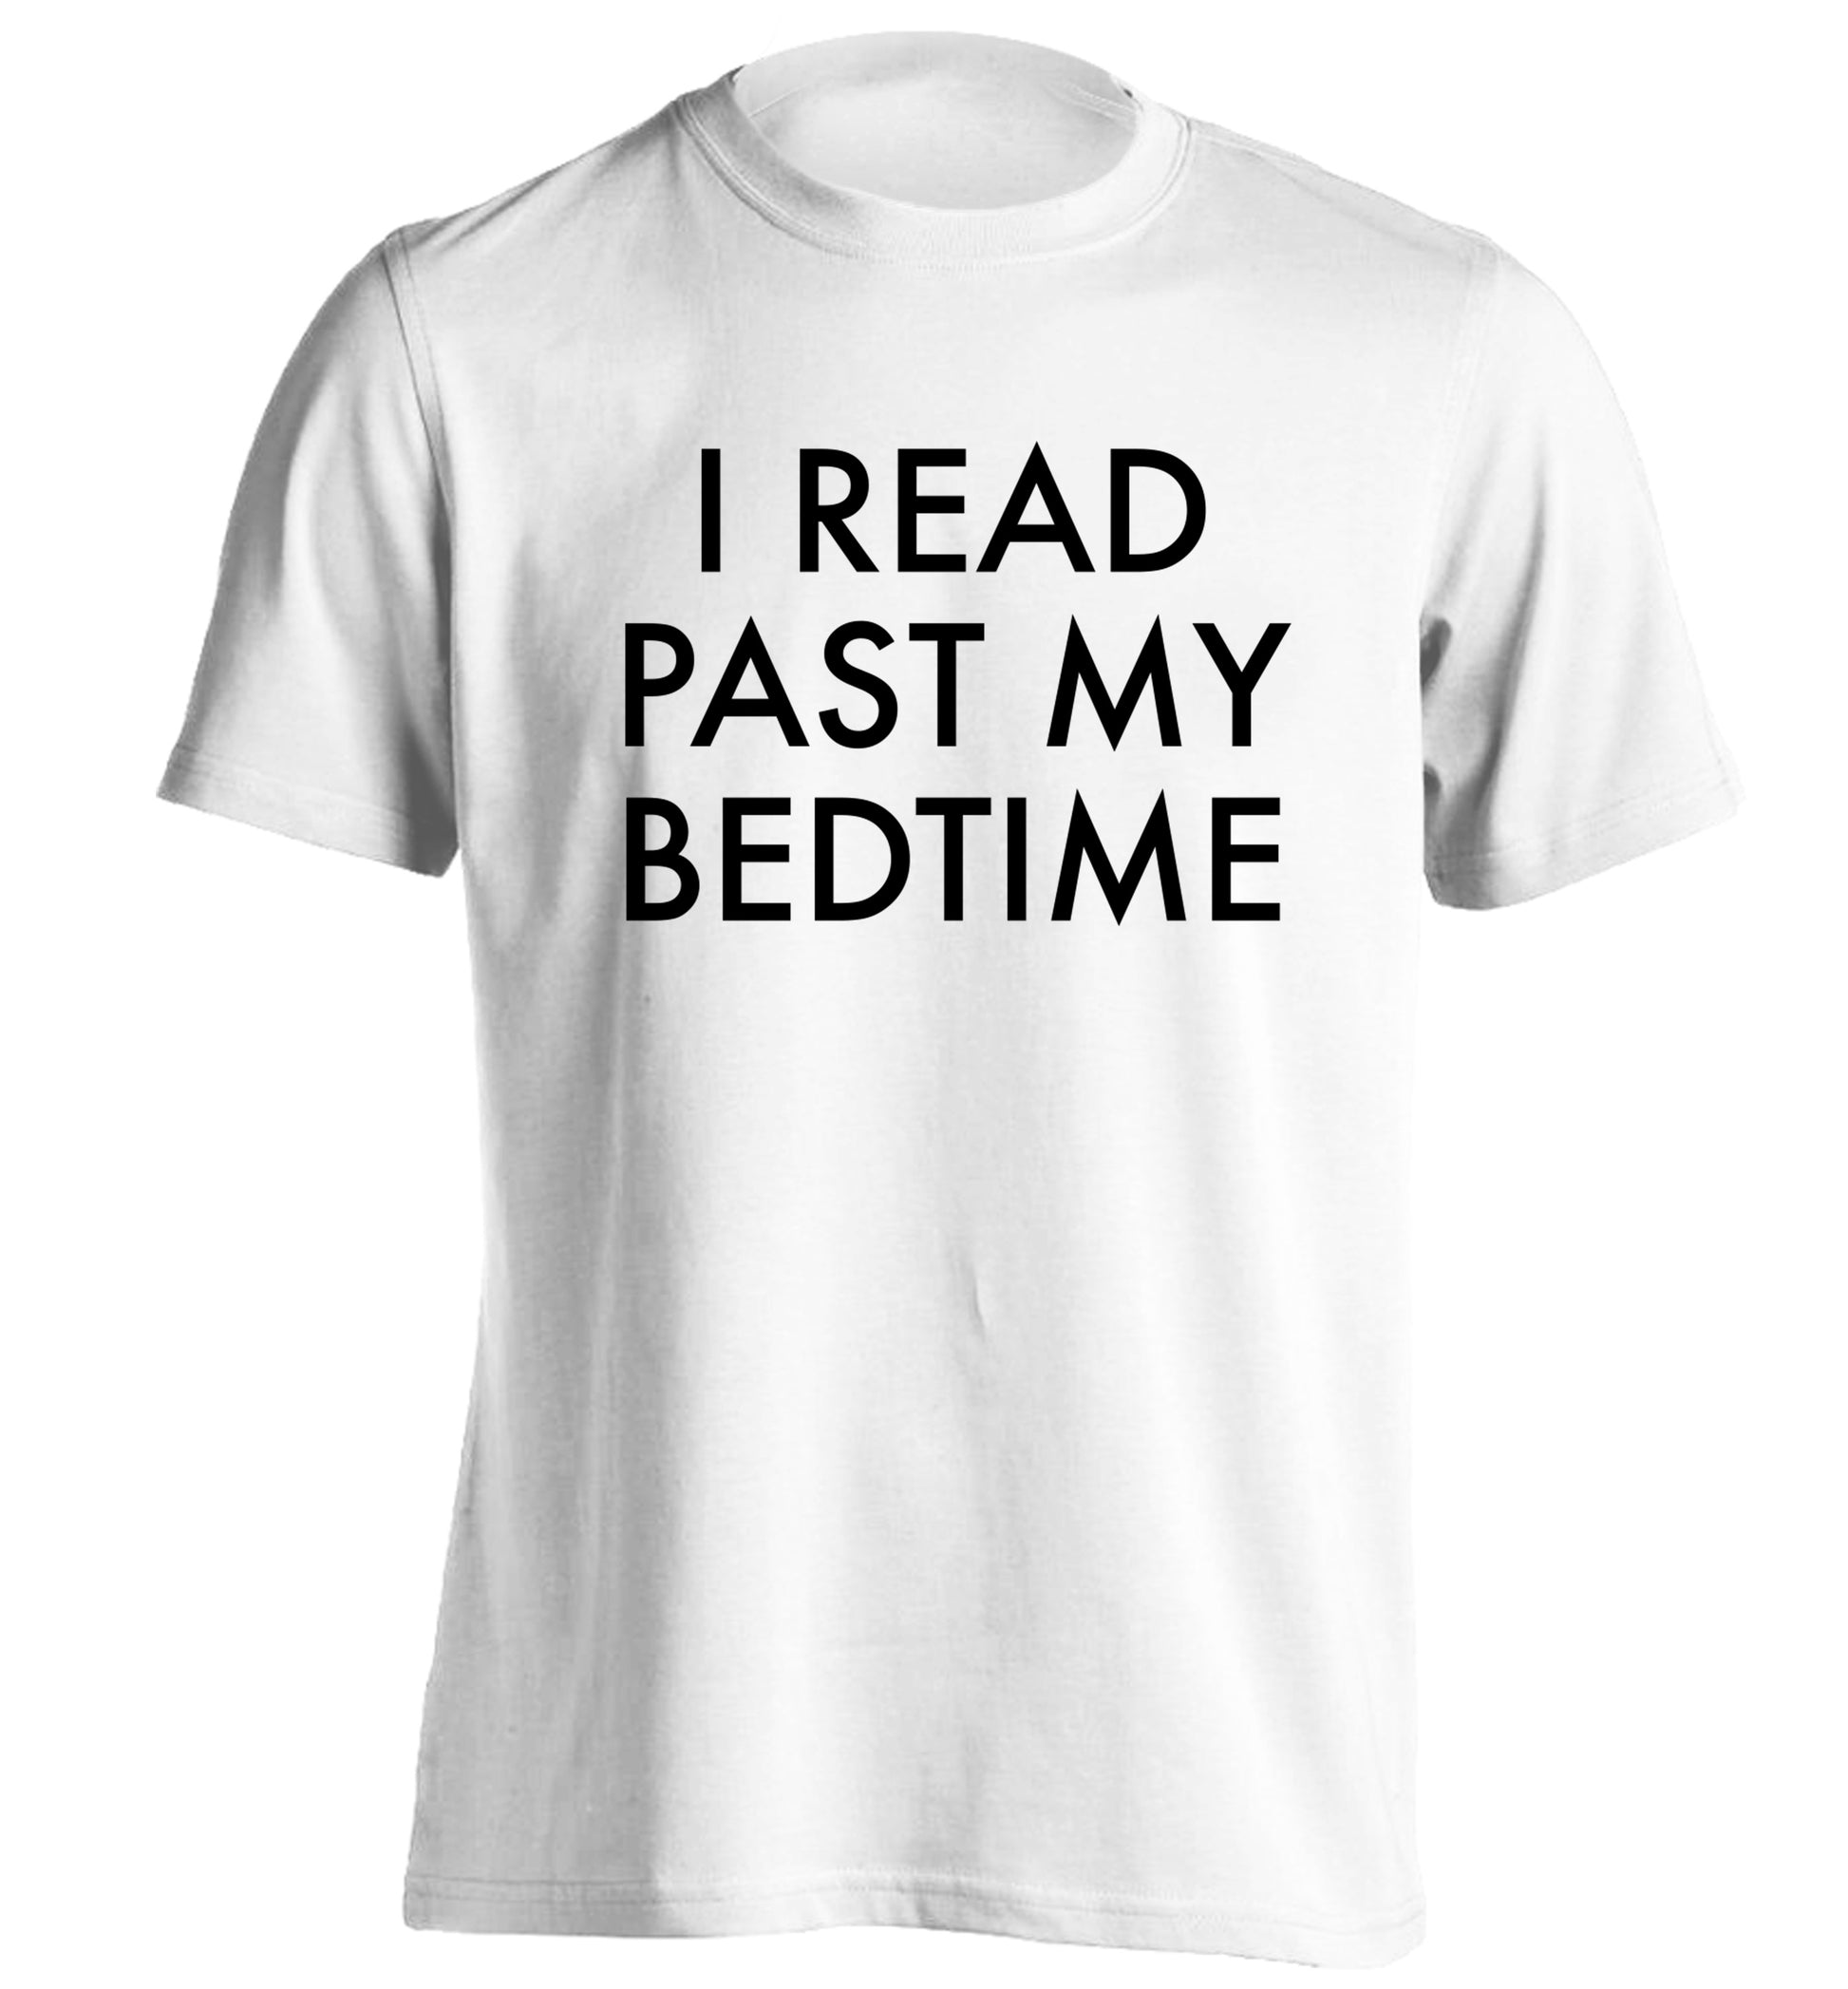 I read past my bedtime adults unisex white Tshirt 2XL